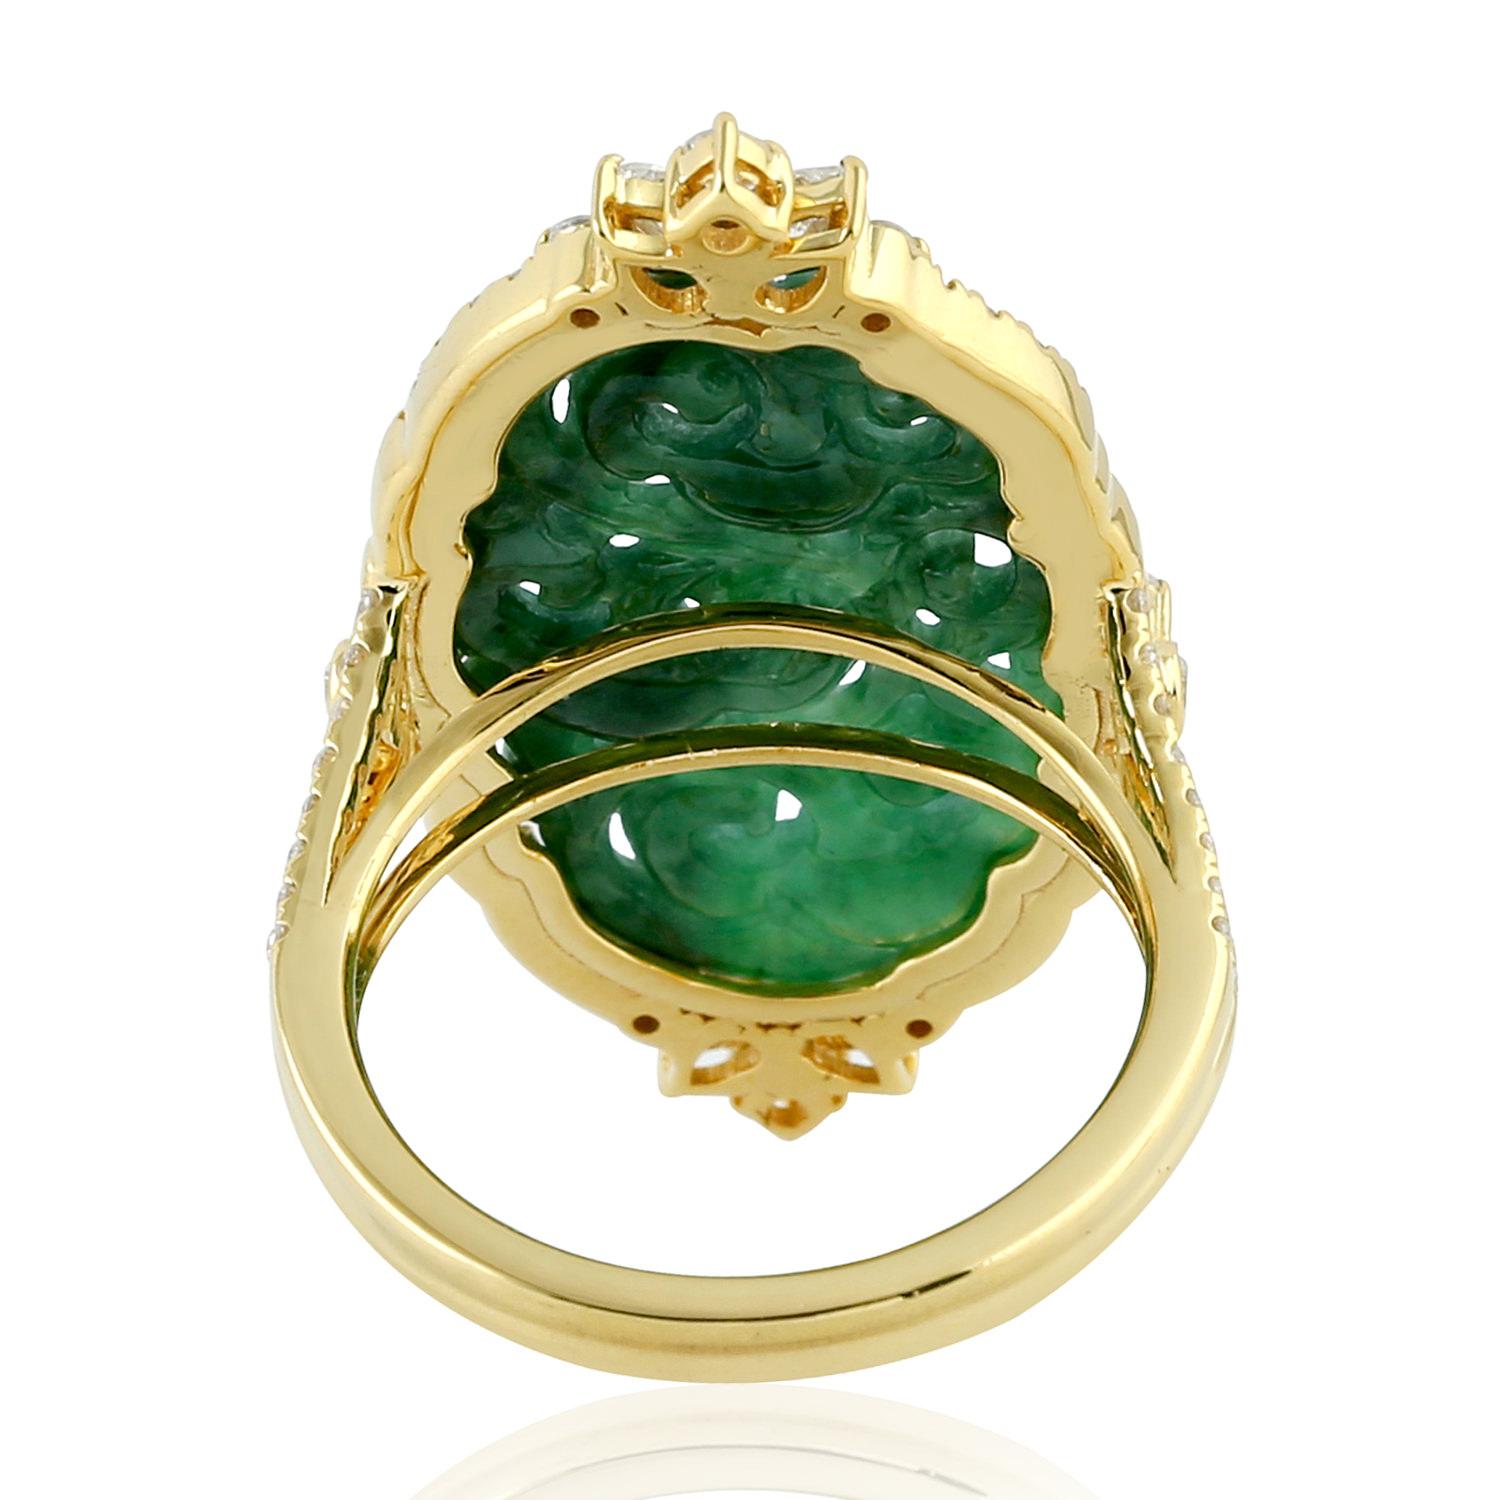 Artisan Oval Shaped Carved Jade Ring With Diamonds Made In 18k Yellow Gold  For Sale